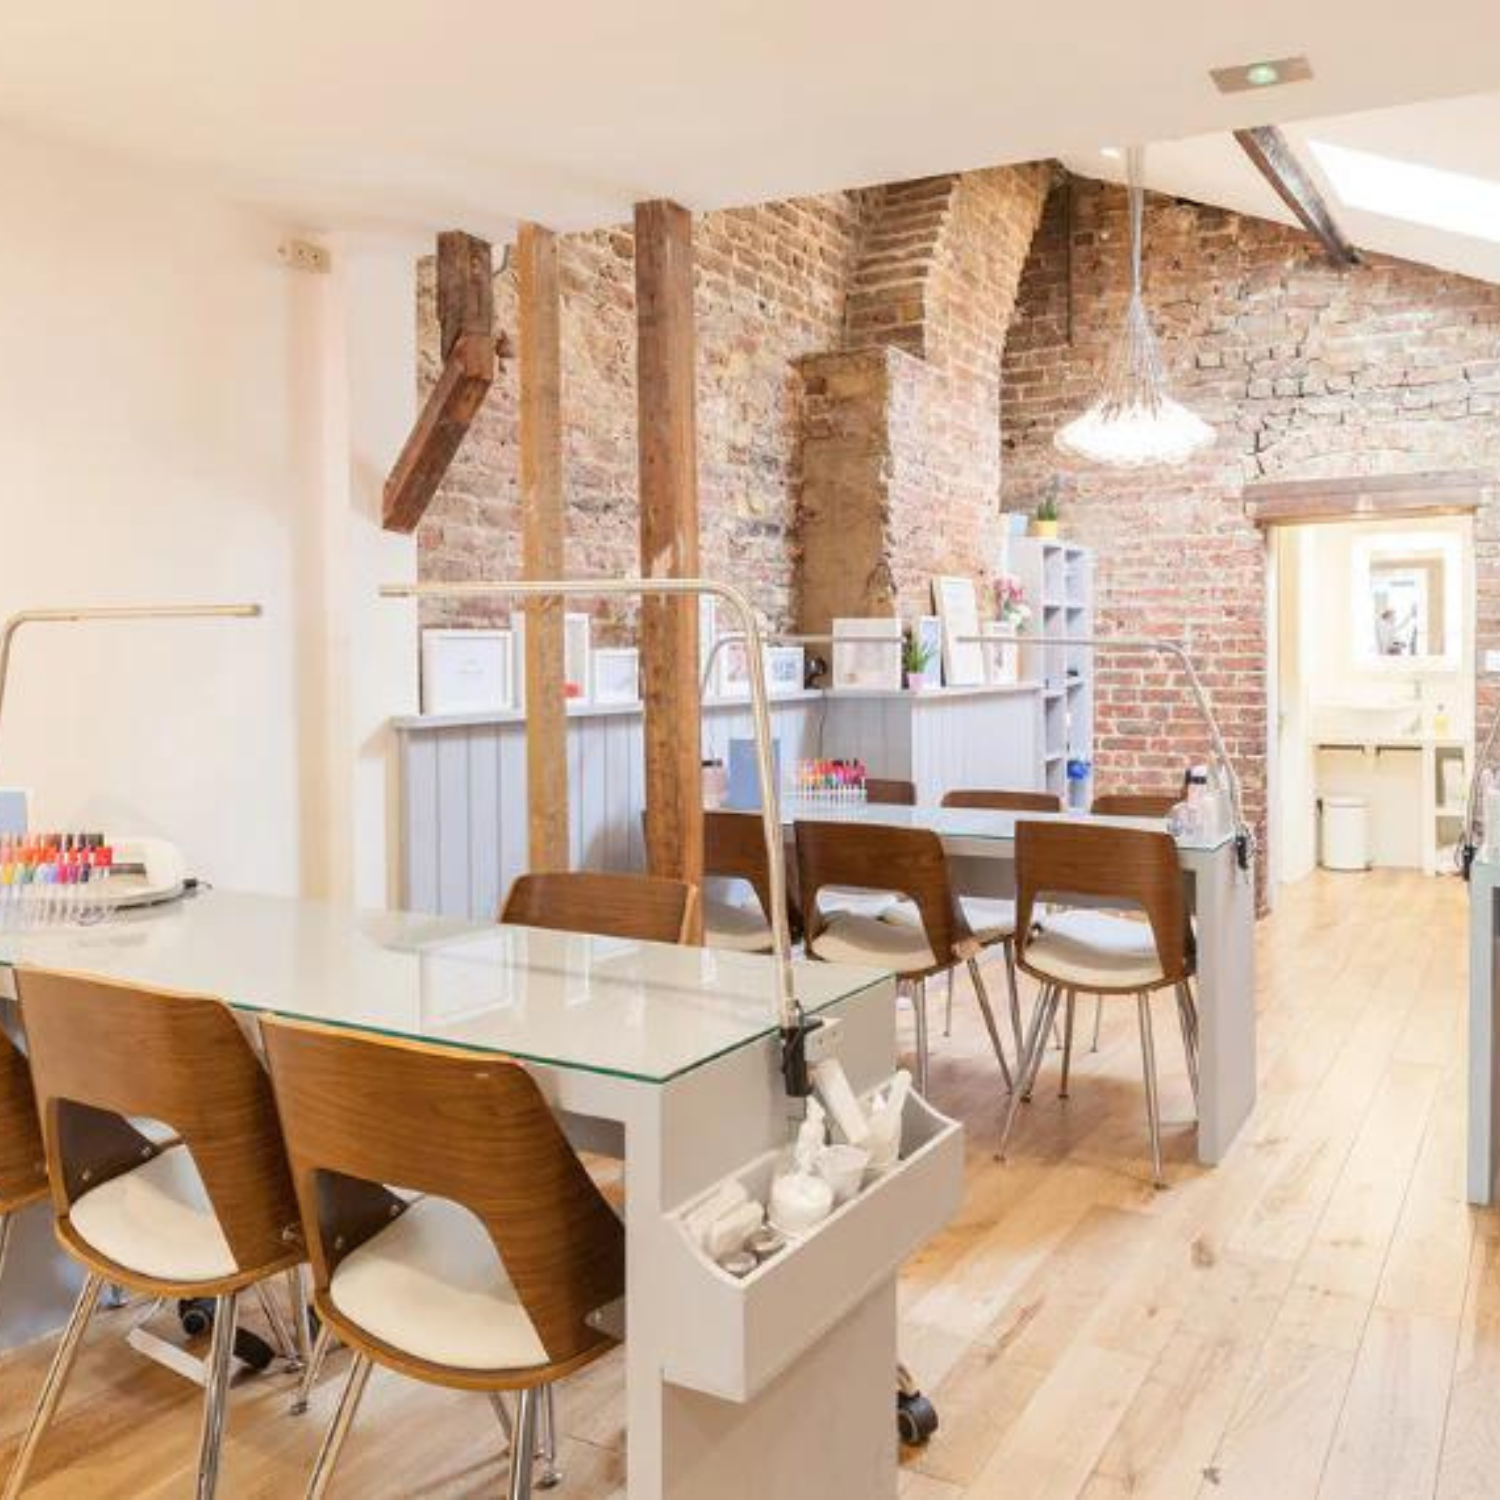 Best nail salon in London, image of London Grace in Clapham with desks, chairs and brick walled building